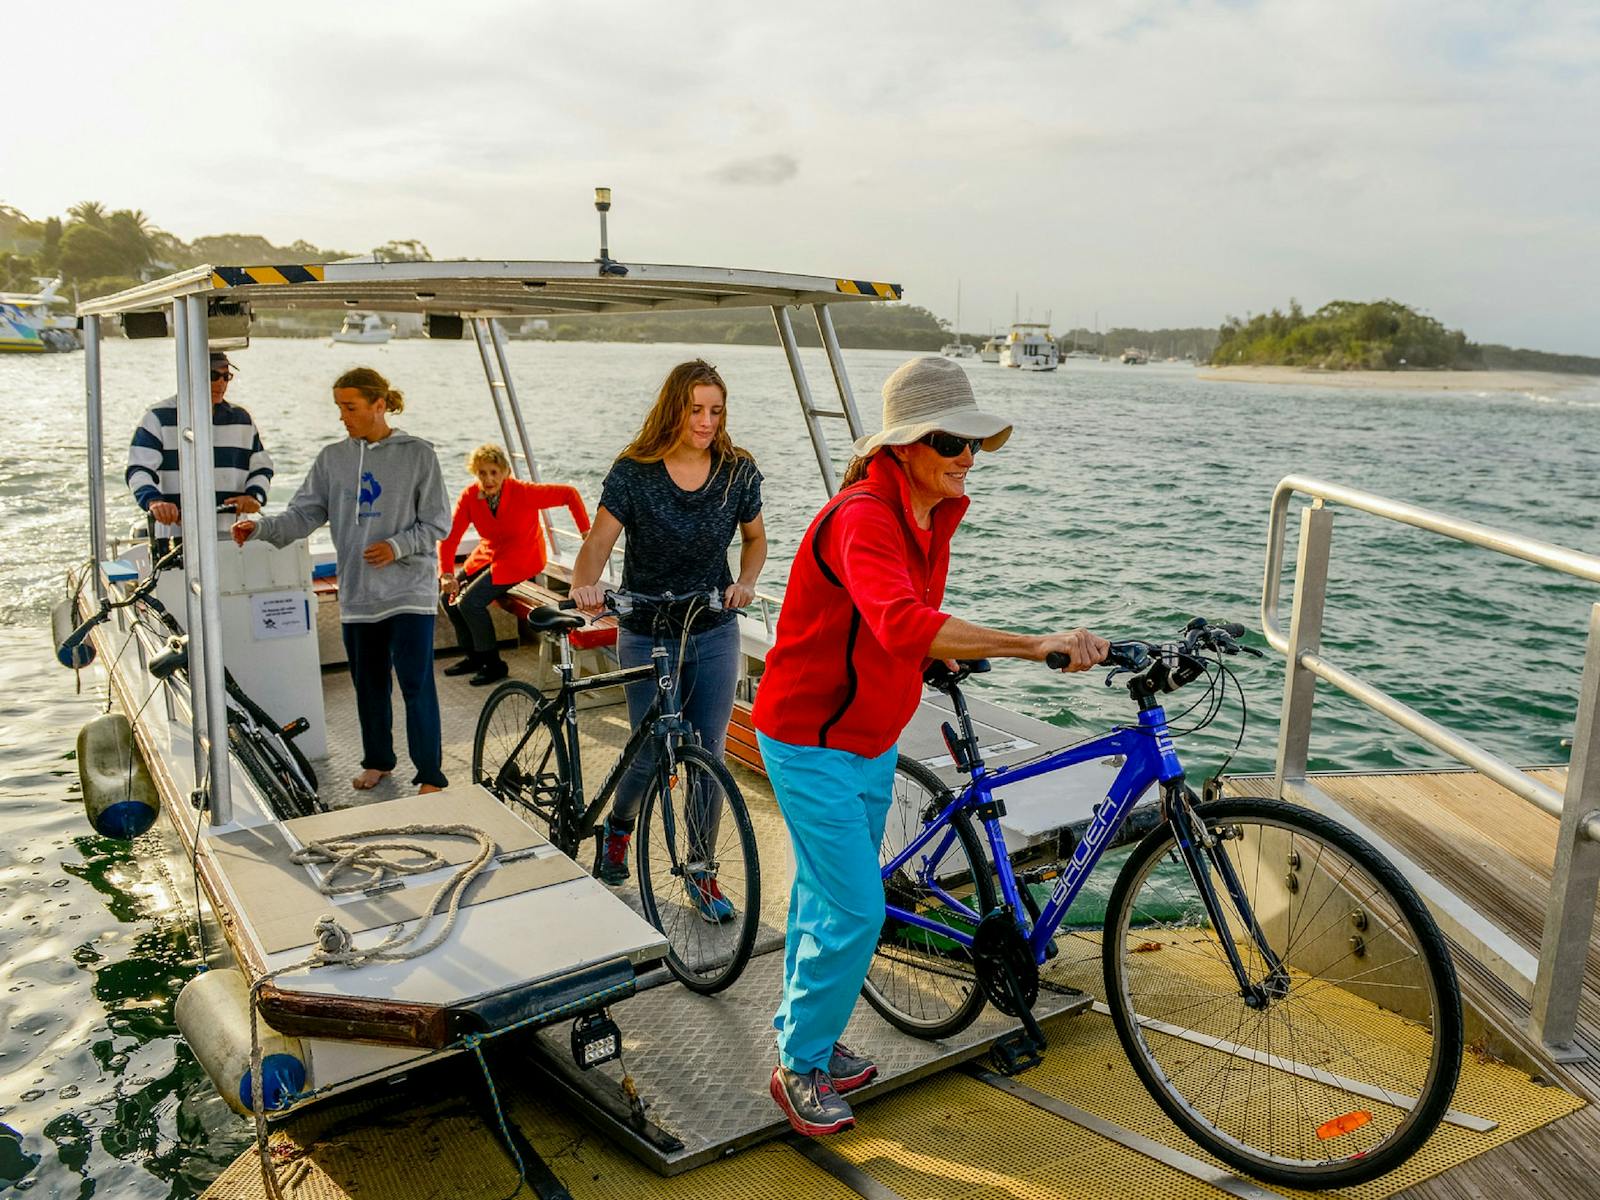 The Huskisson Ferry can transport you and your bike across Currambene Creek to Myola.